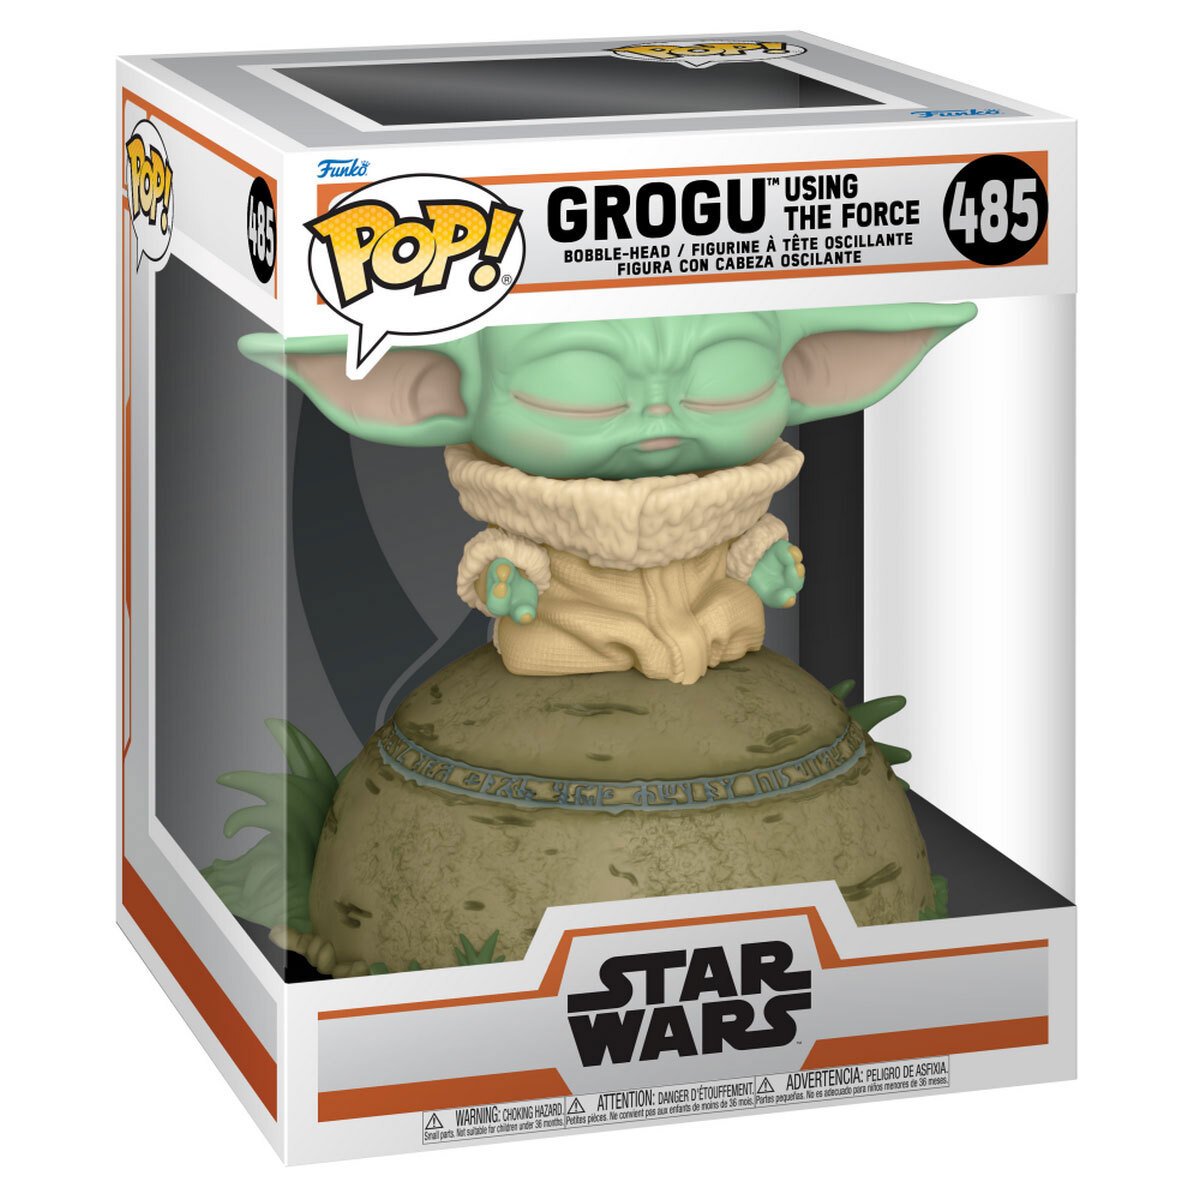 Funko Pop Star Wars - Deluxe: Mandalorian- The Child Grogu Using the Force #485 with Lights and Sound (6828531908708)